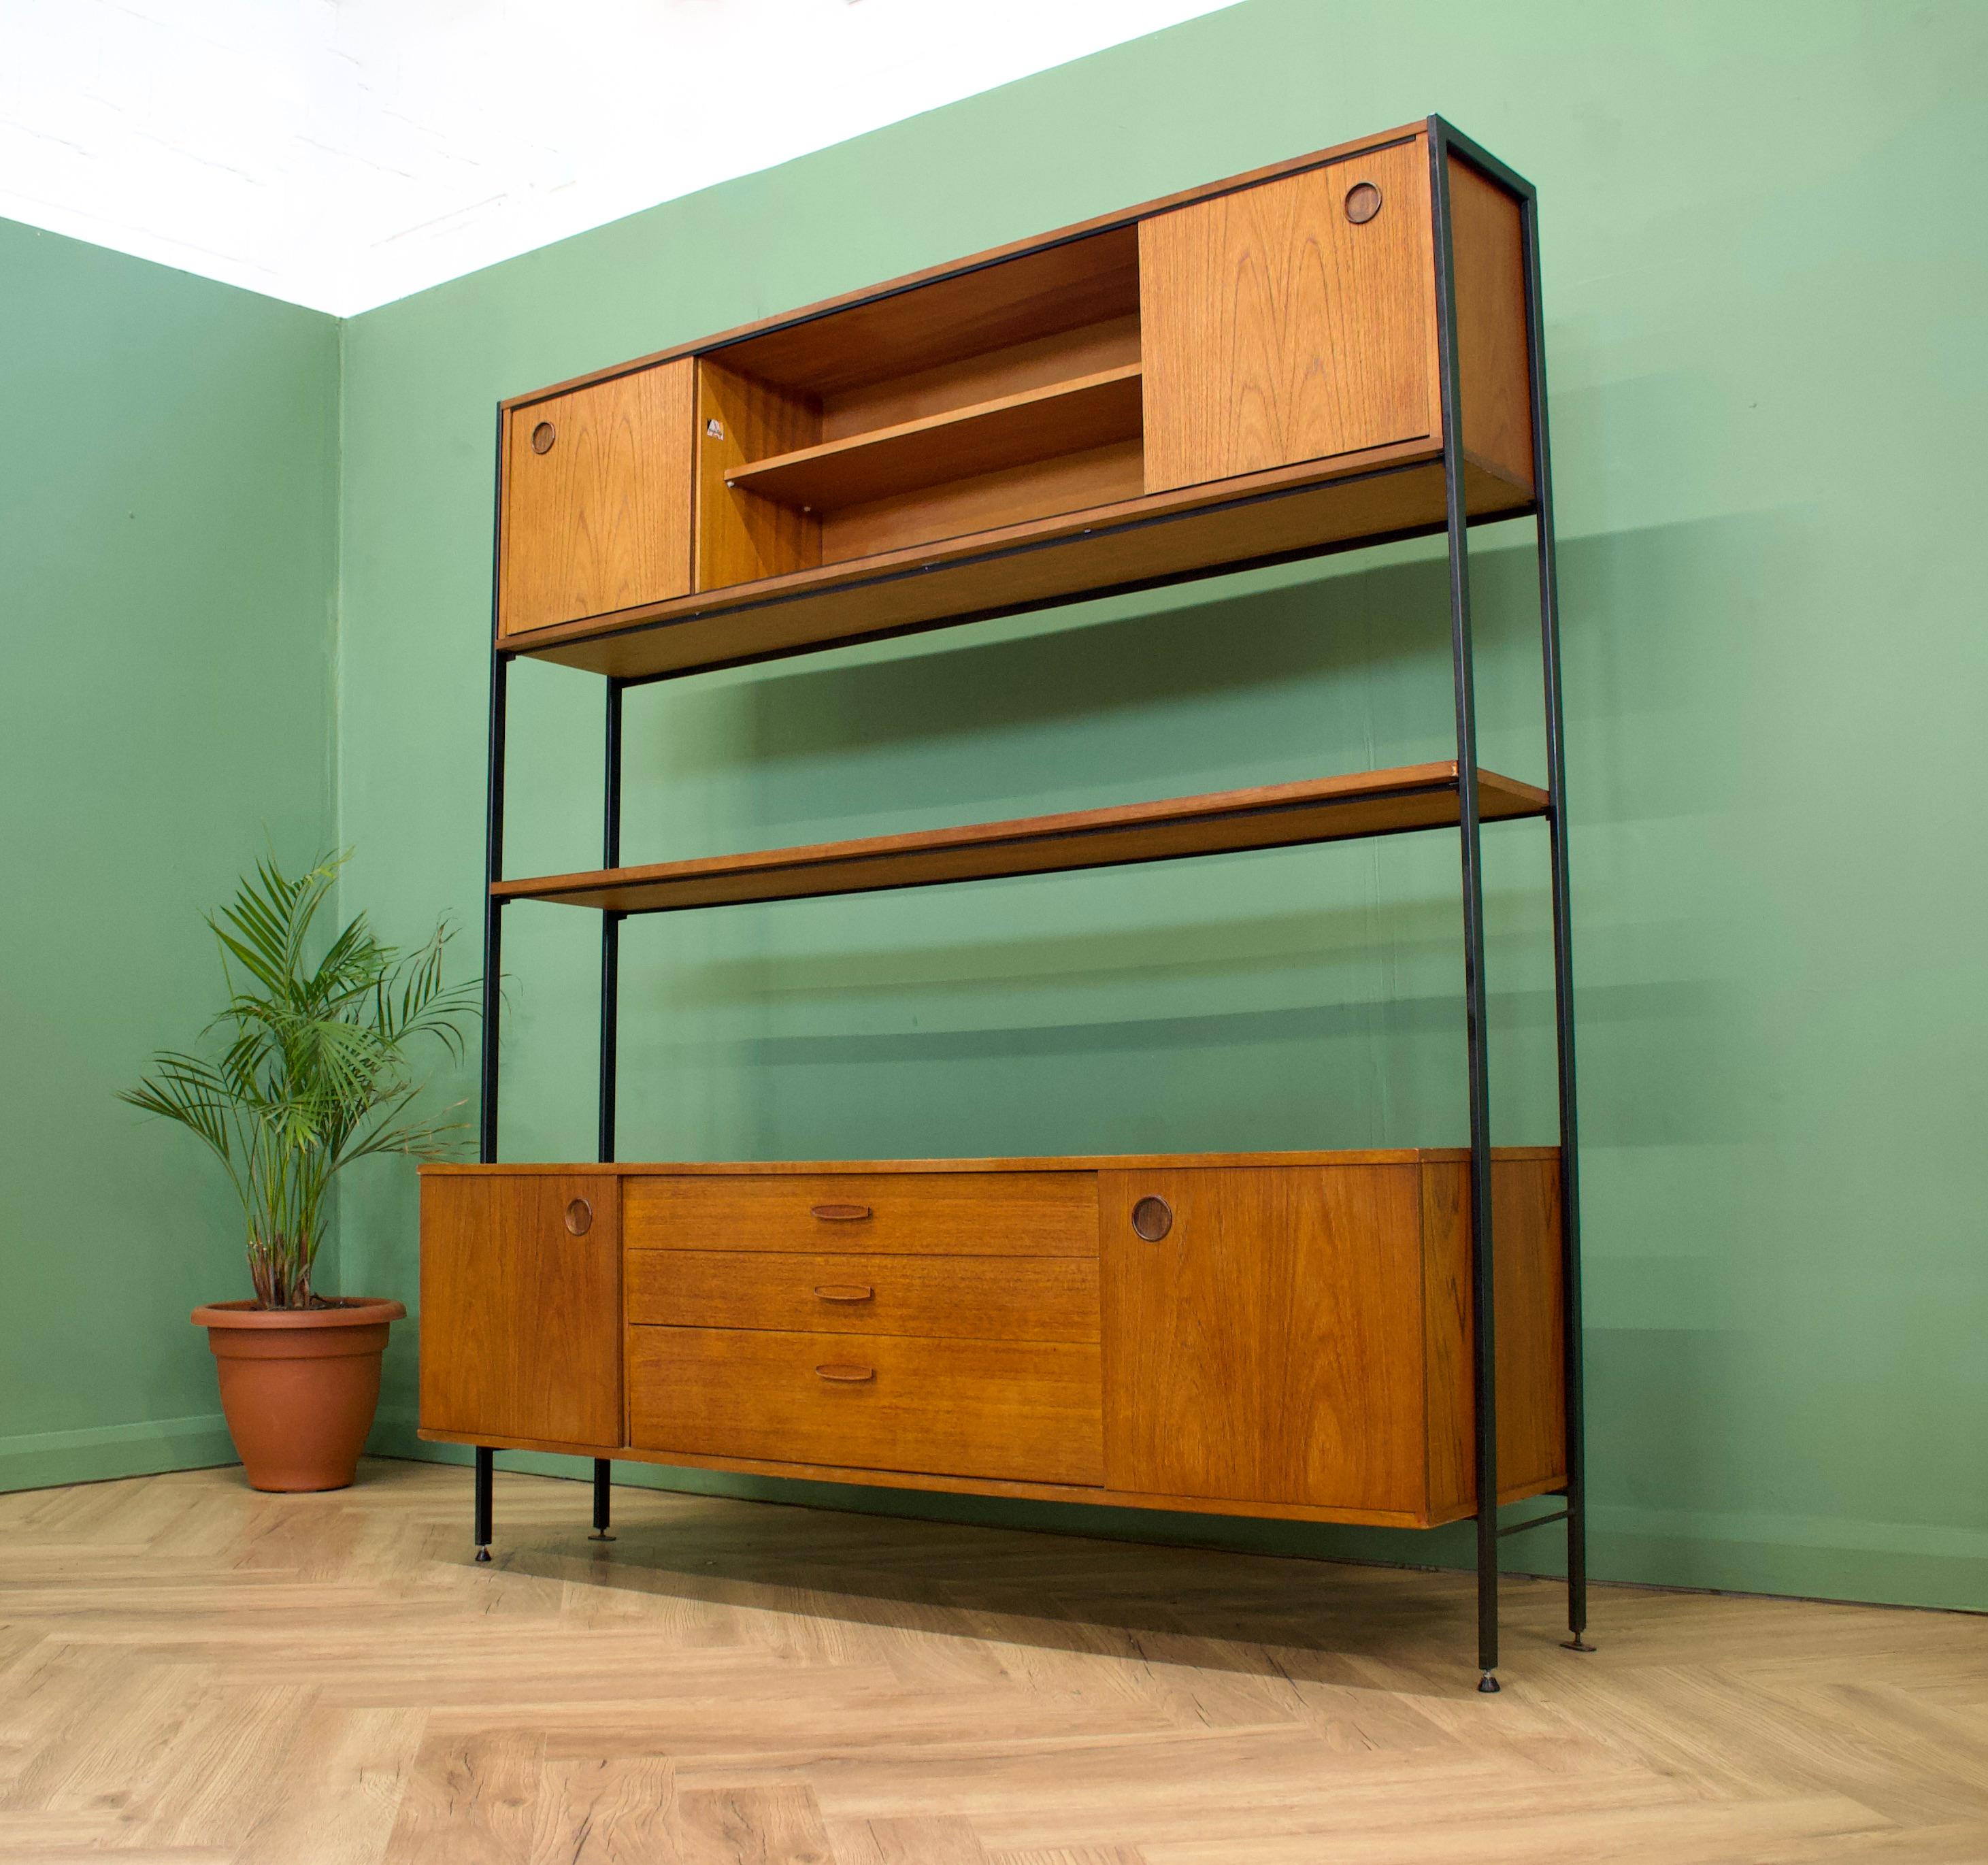 - Mid-Century Modern shelving unit or wall unit
- Manufactured by Avalon in the UK
- Made from teak and teak veneer
- Featuring drawers, shelves and sliding door compartments.